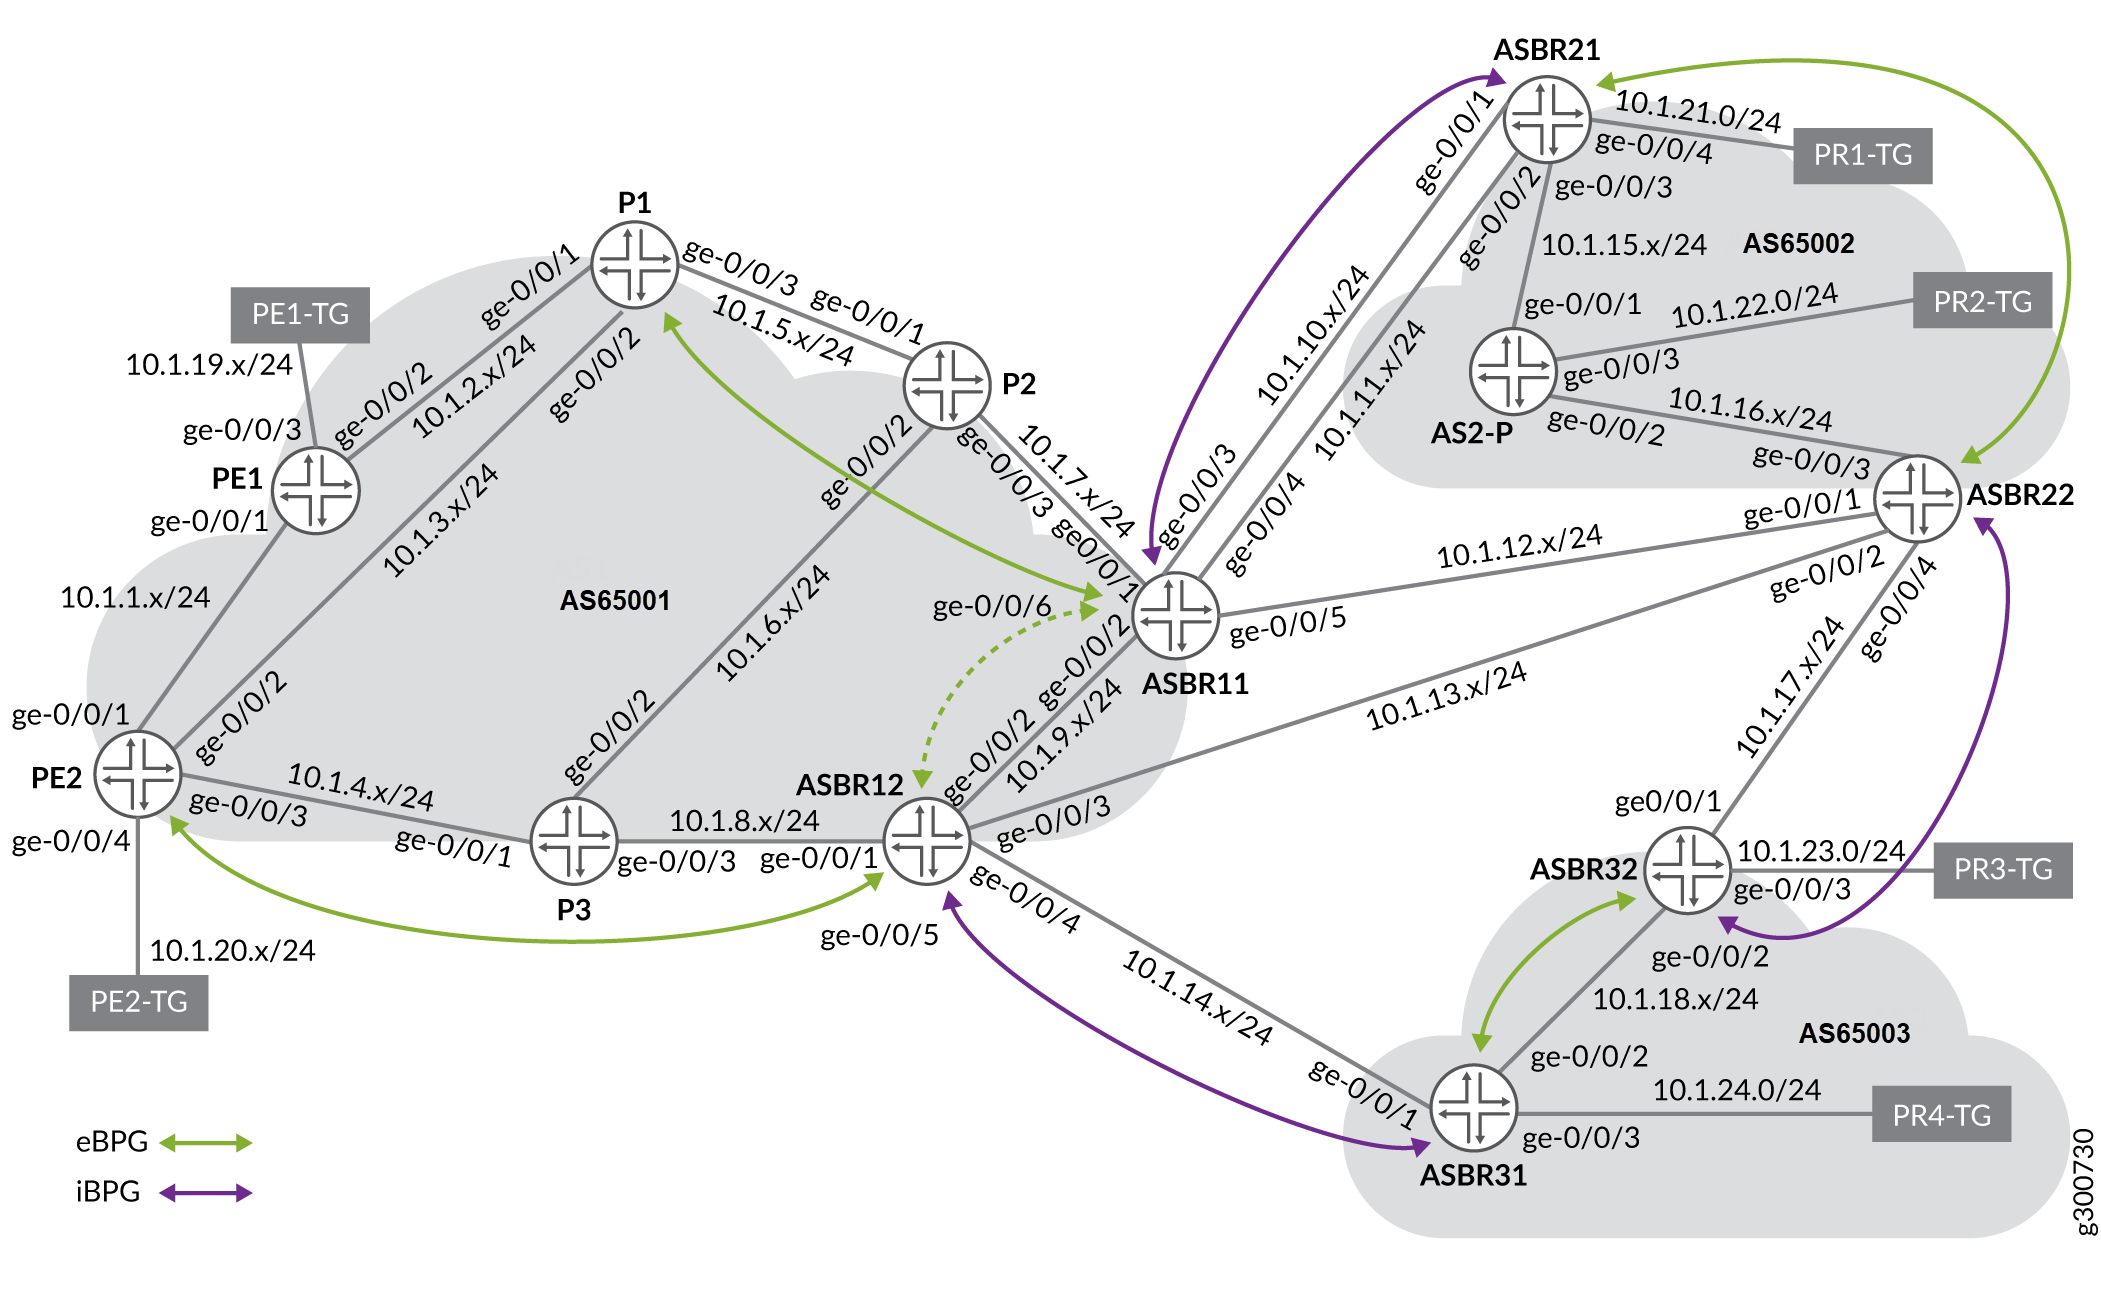 NorthStar EPE Reference Network Topology